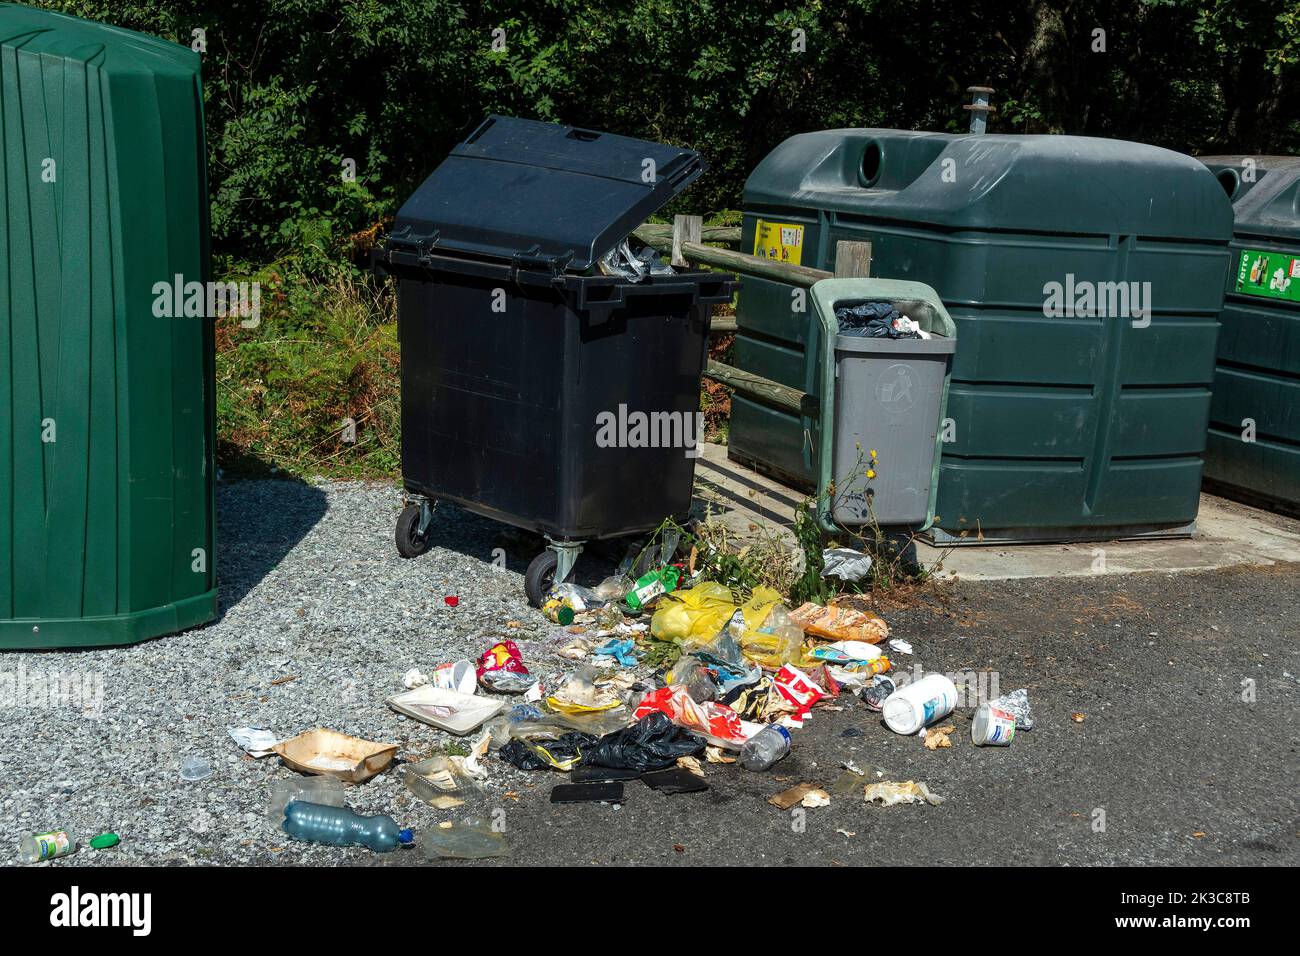 Overflowing recycling bins Stock Photo